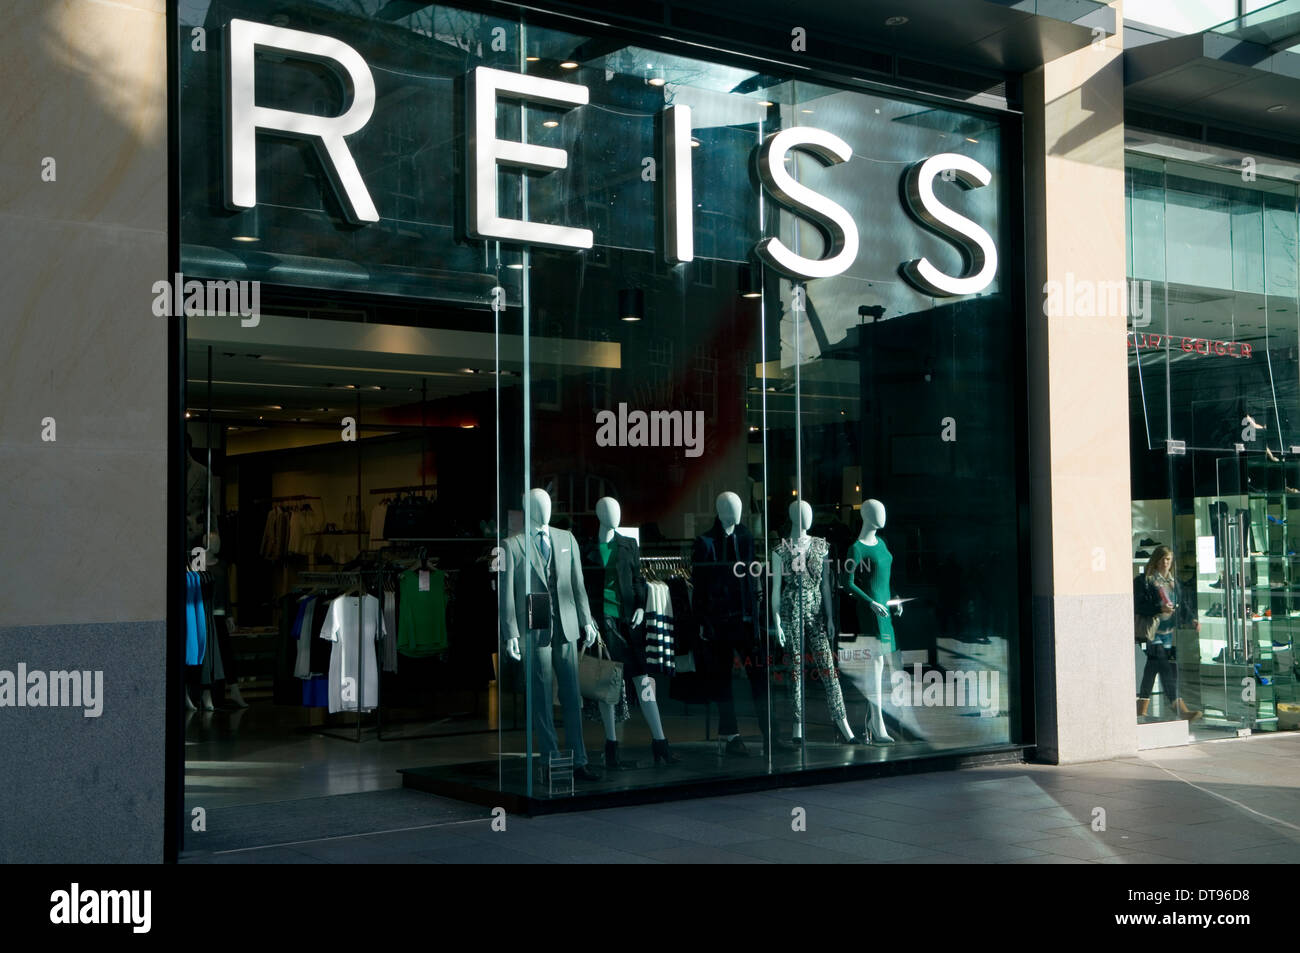 Reiss Outlet High Resolution Stock ...